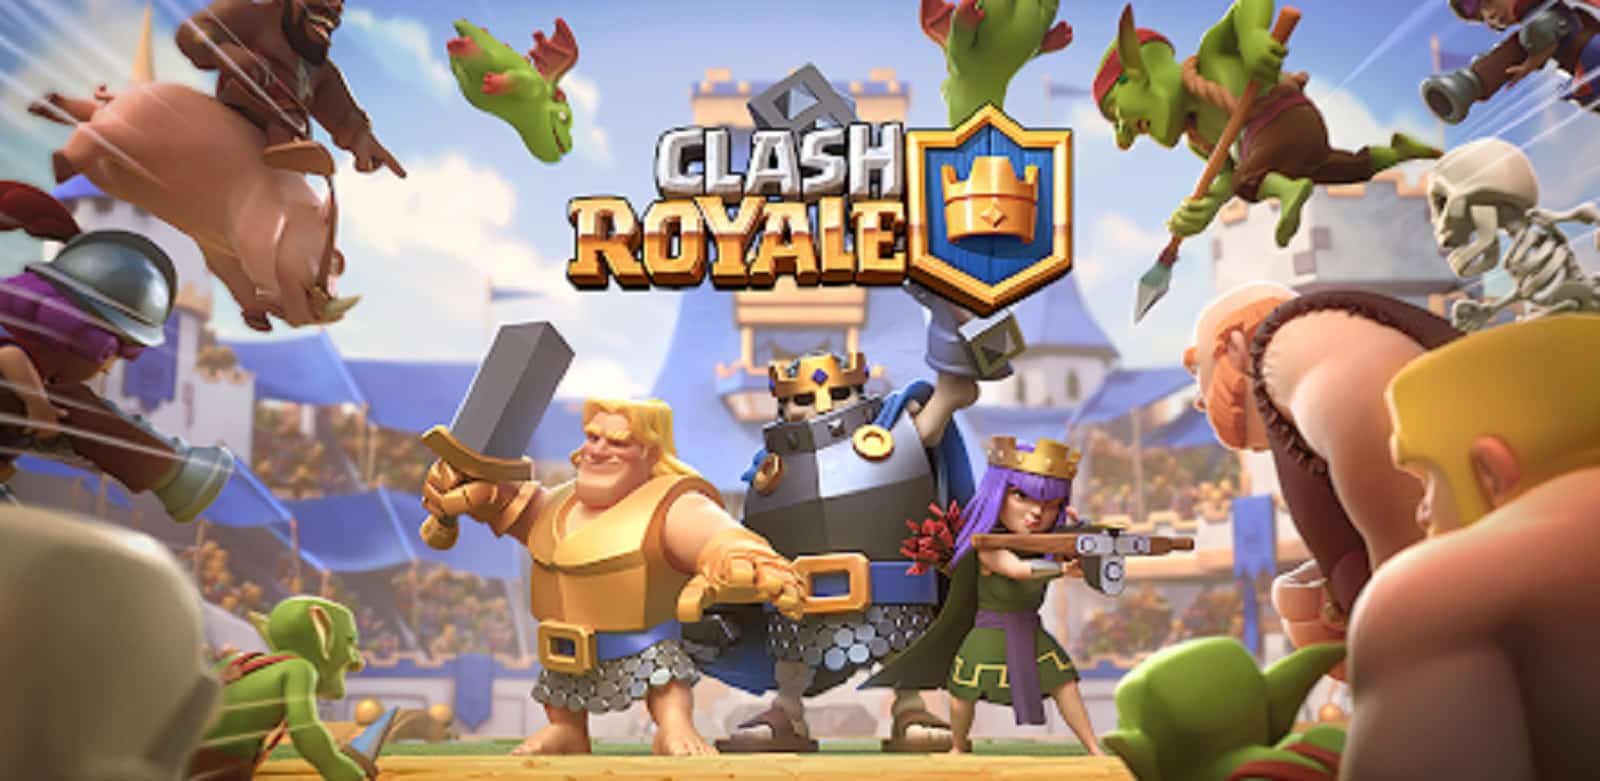 art for Clash Royale featuring the three heroes in the game